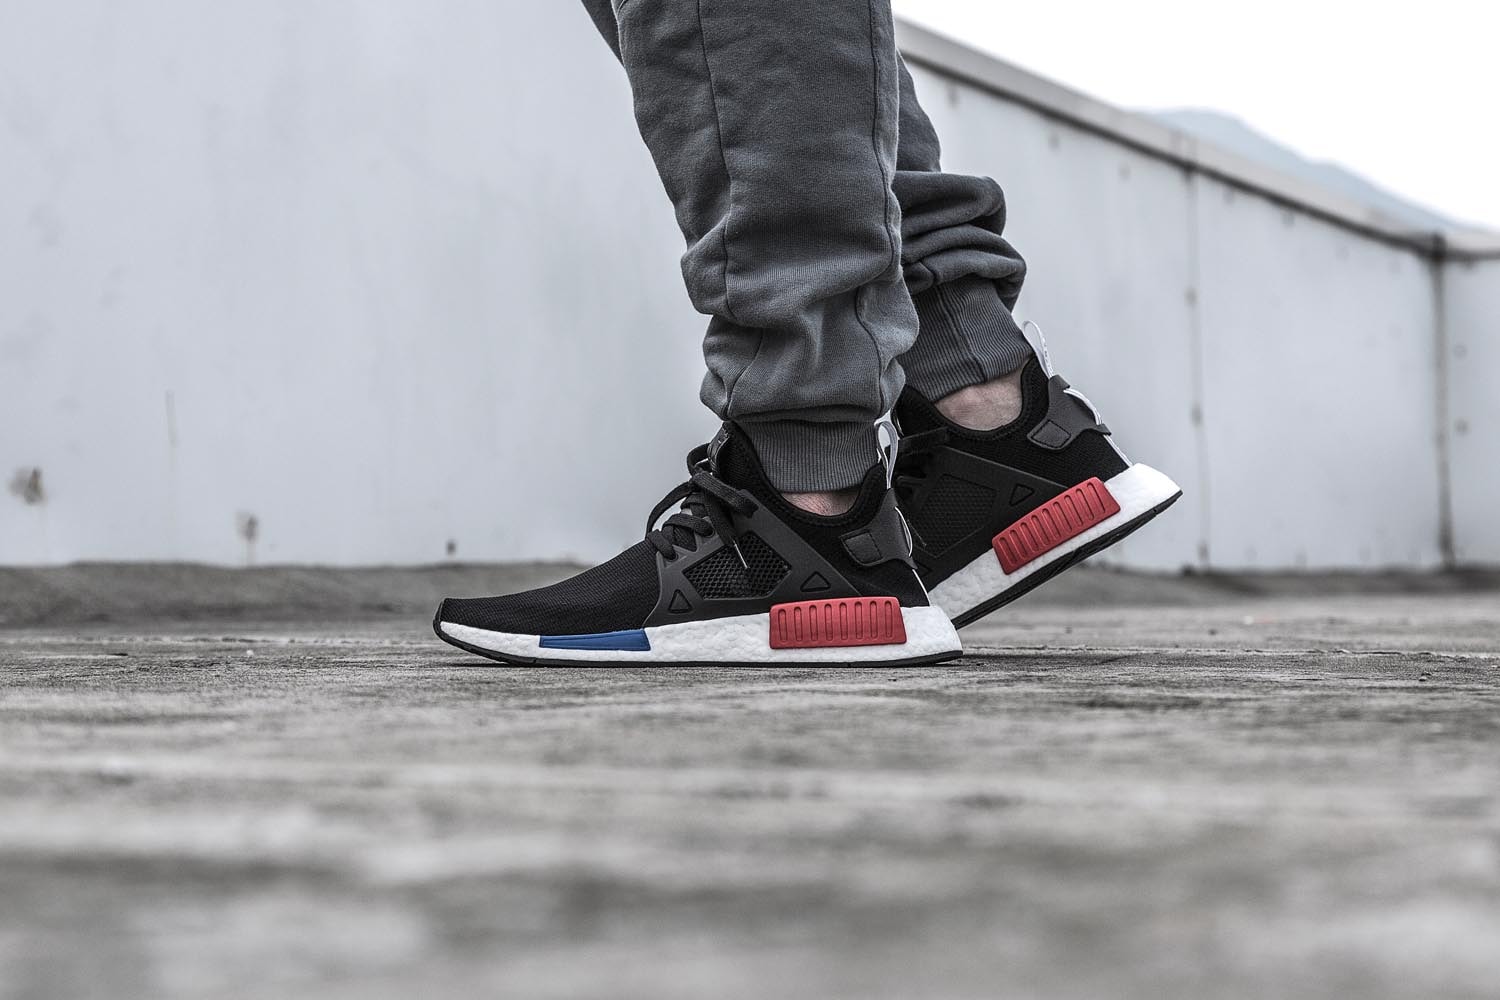 NMD R1 'Gum Pack', NMD XR1 OG, NMD R1 'Glitch Camo' and NMD CS2 'Black/Pink' and 'Grey/Purple'